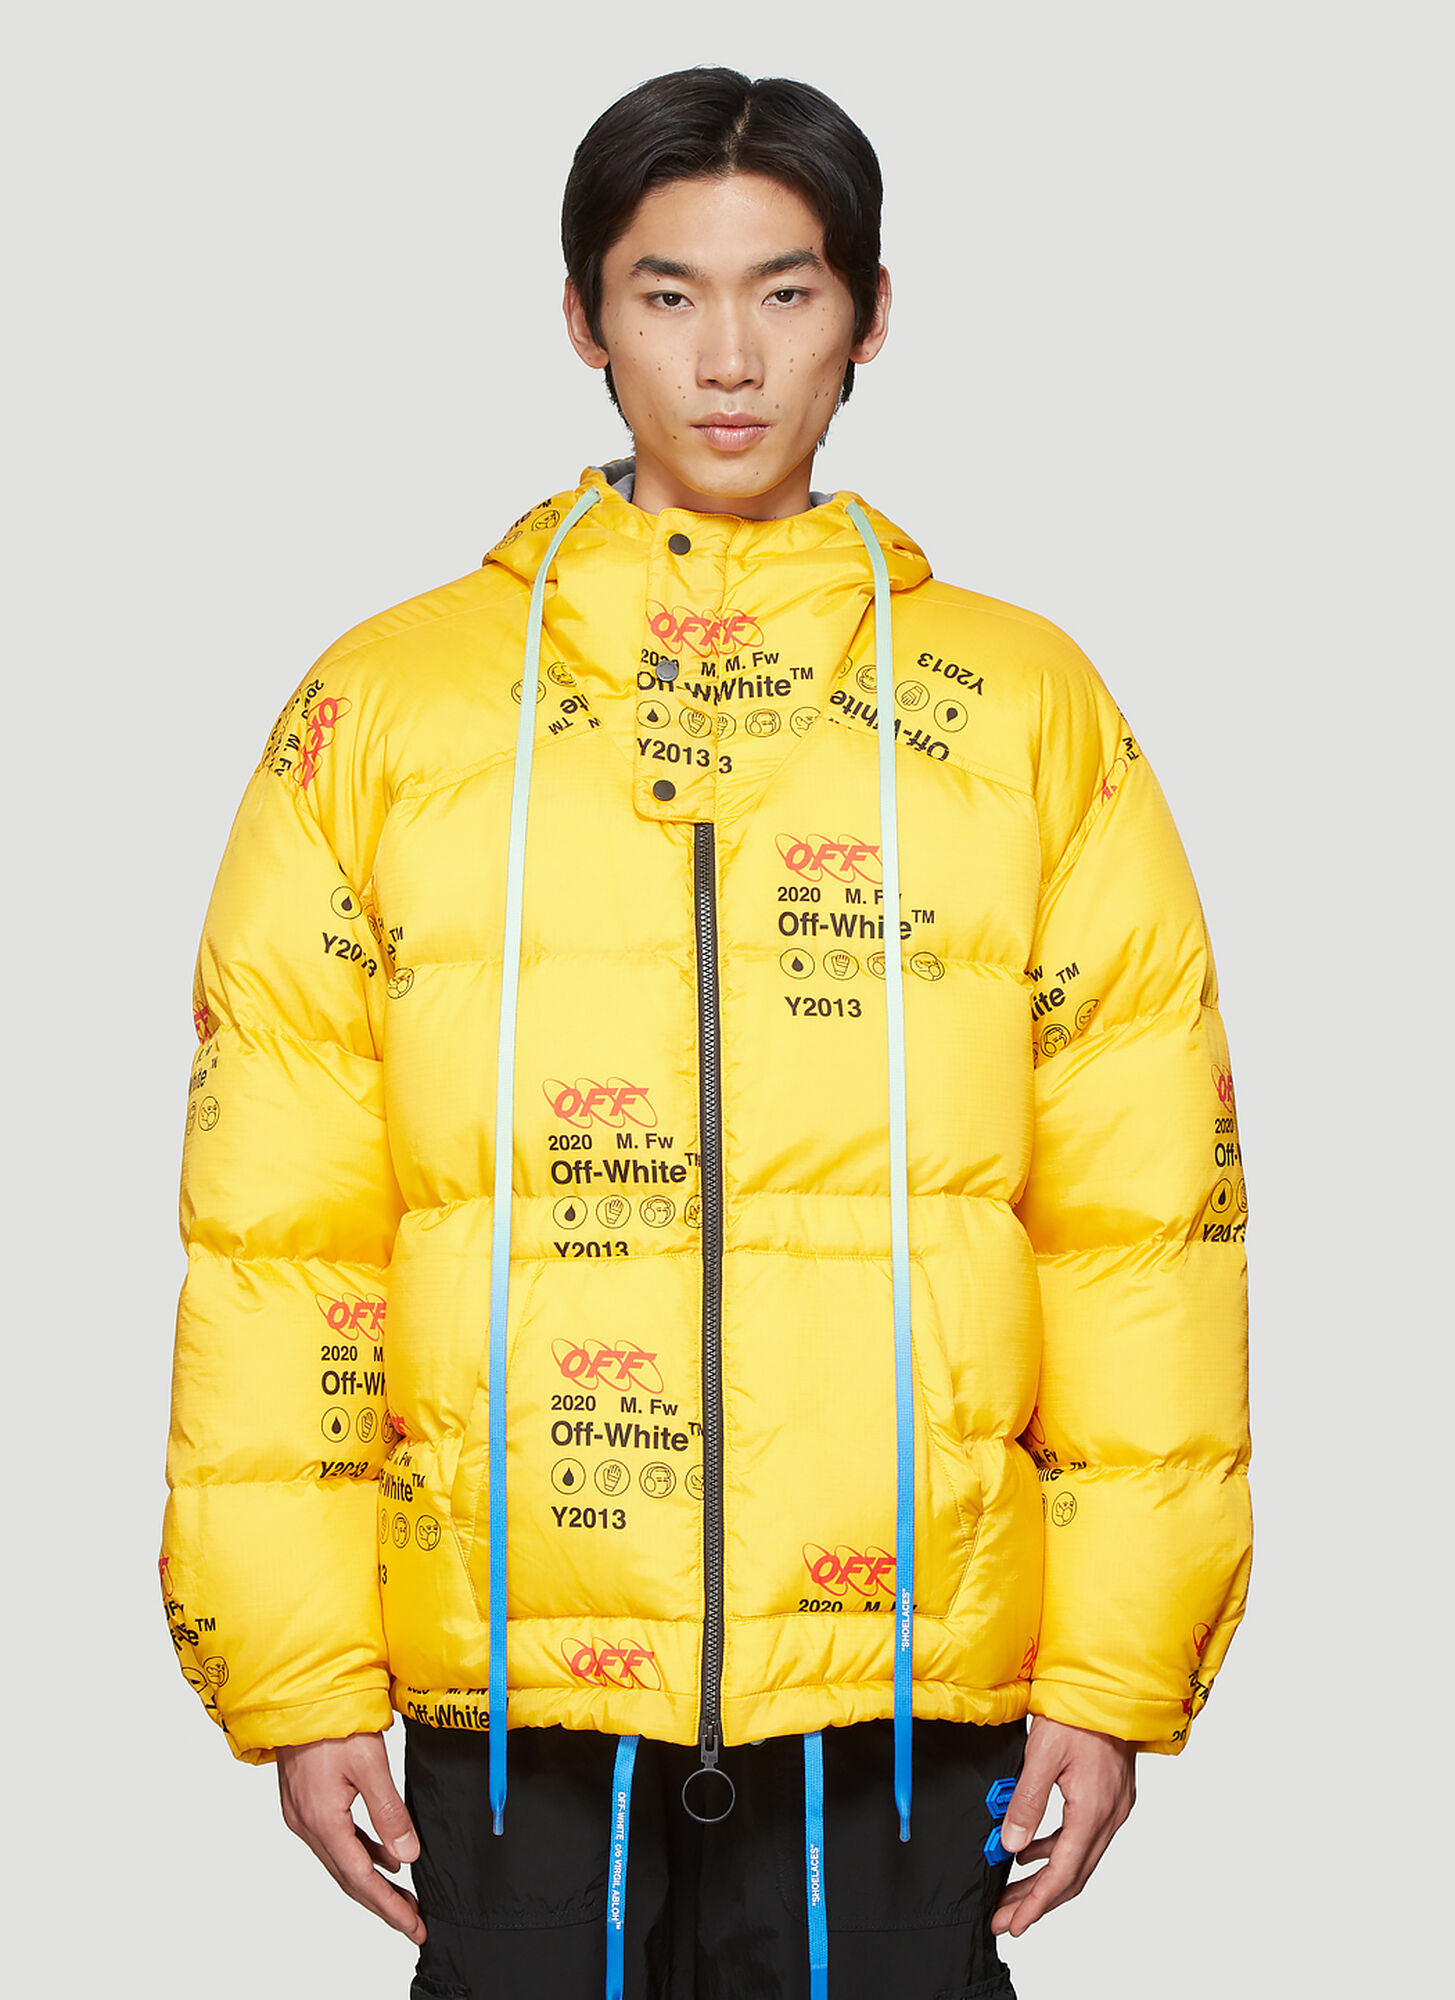 Off-White Industrial Puffer Jacket in Yellow size M | The Fashionisto